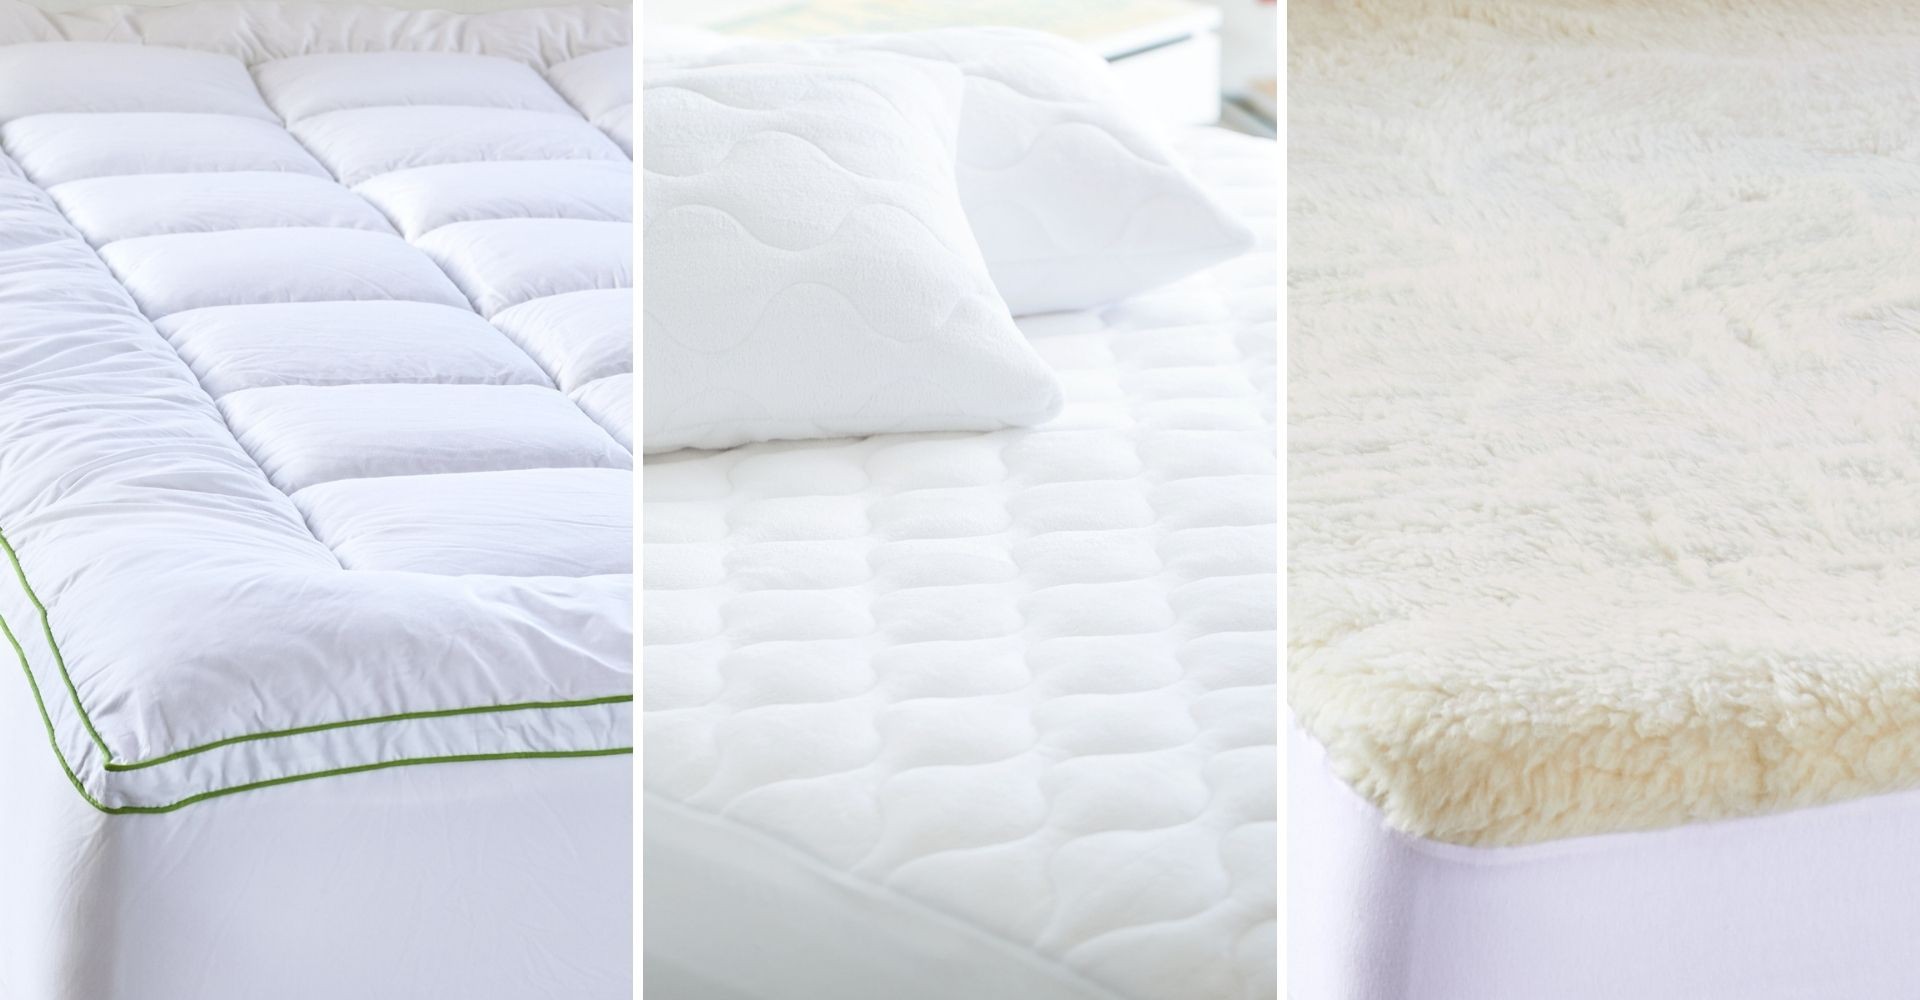 lorraine lea mattress topper protector and underlay for mattress